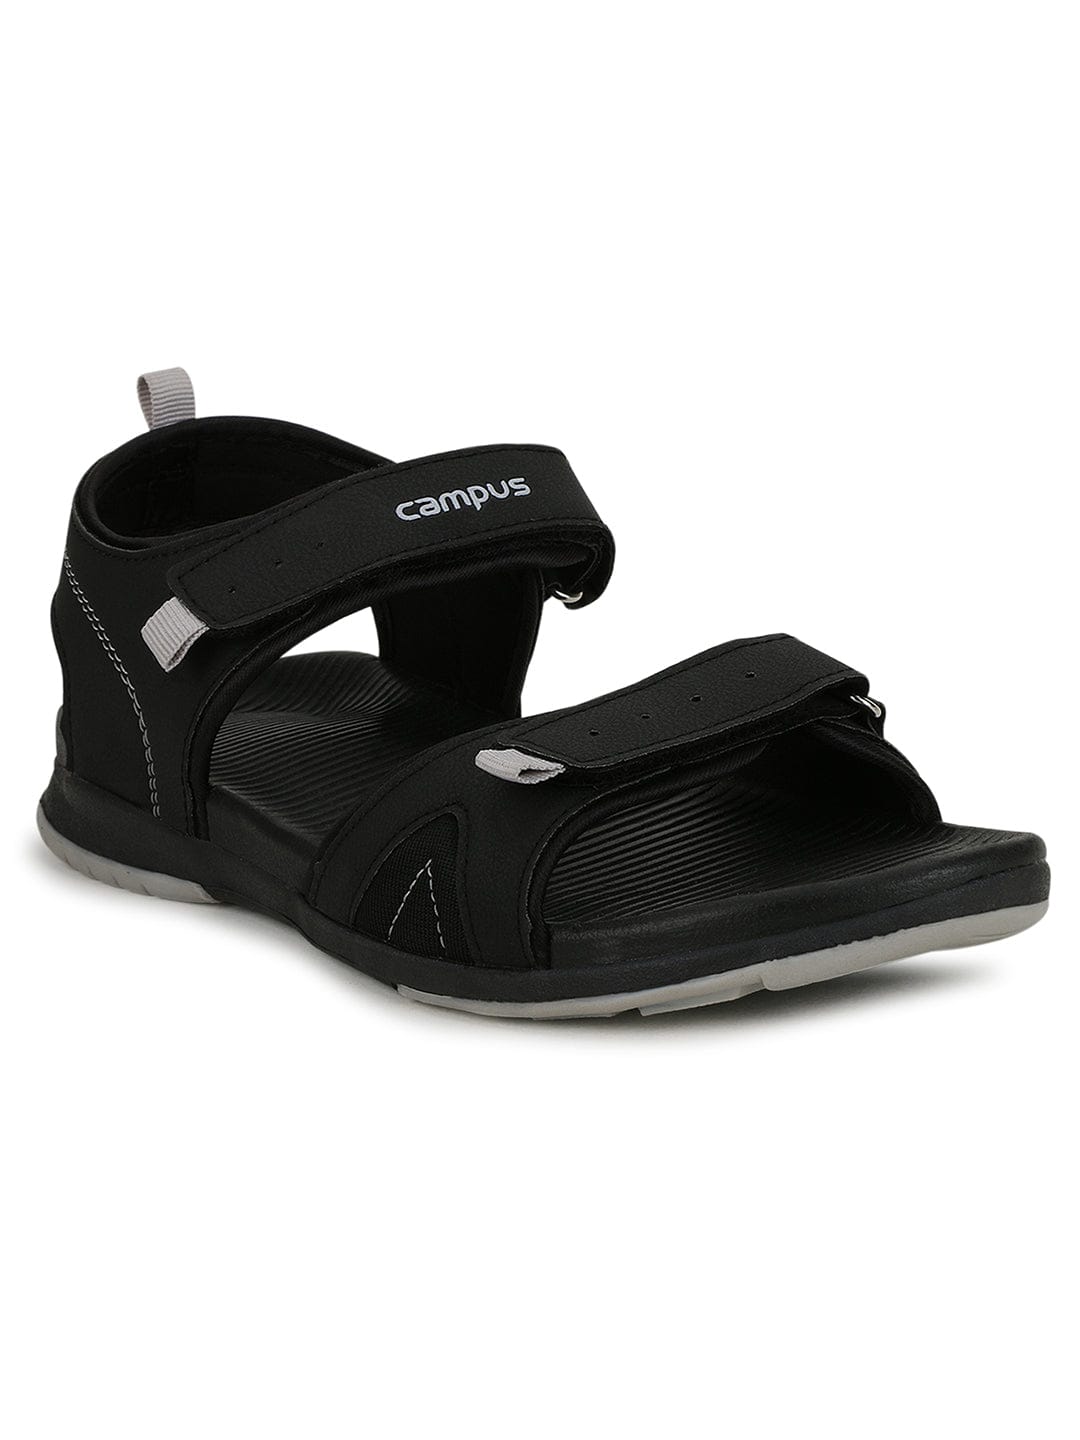 Buy Campus Sandals For Men ( Red ) Online at Low Prices in India -  Paytmmall.com